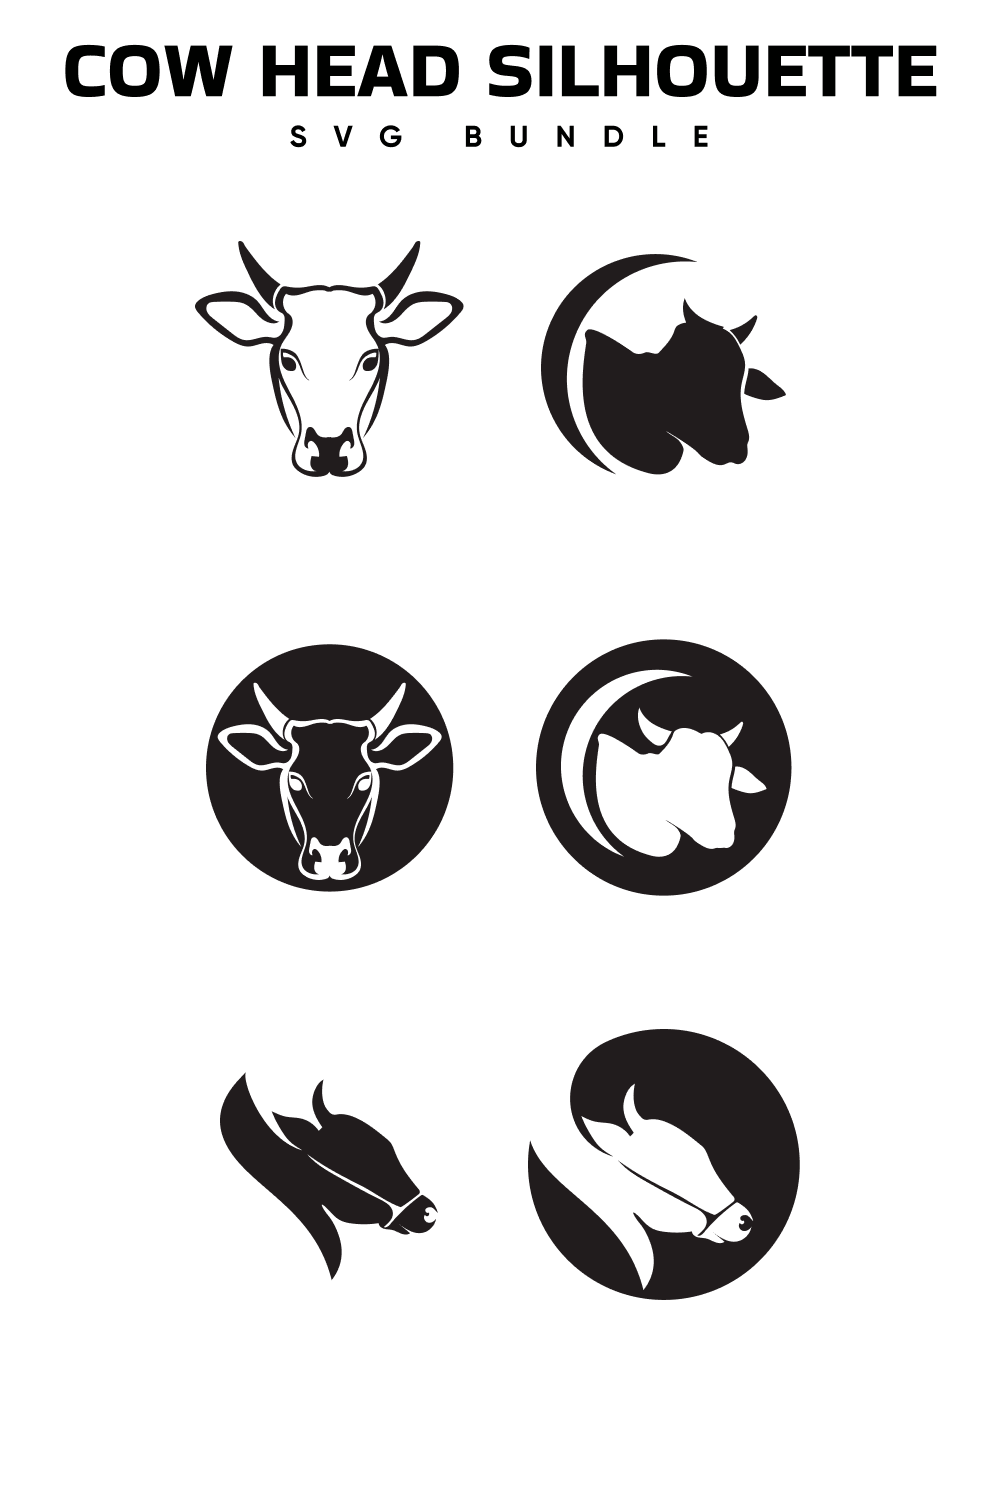 Black and white photo of a cow head silhouettes.